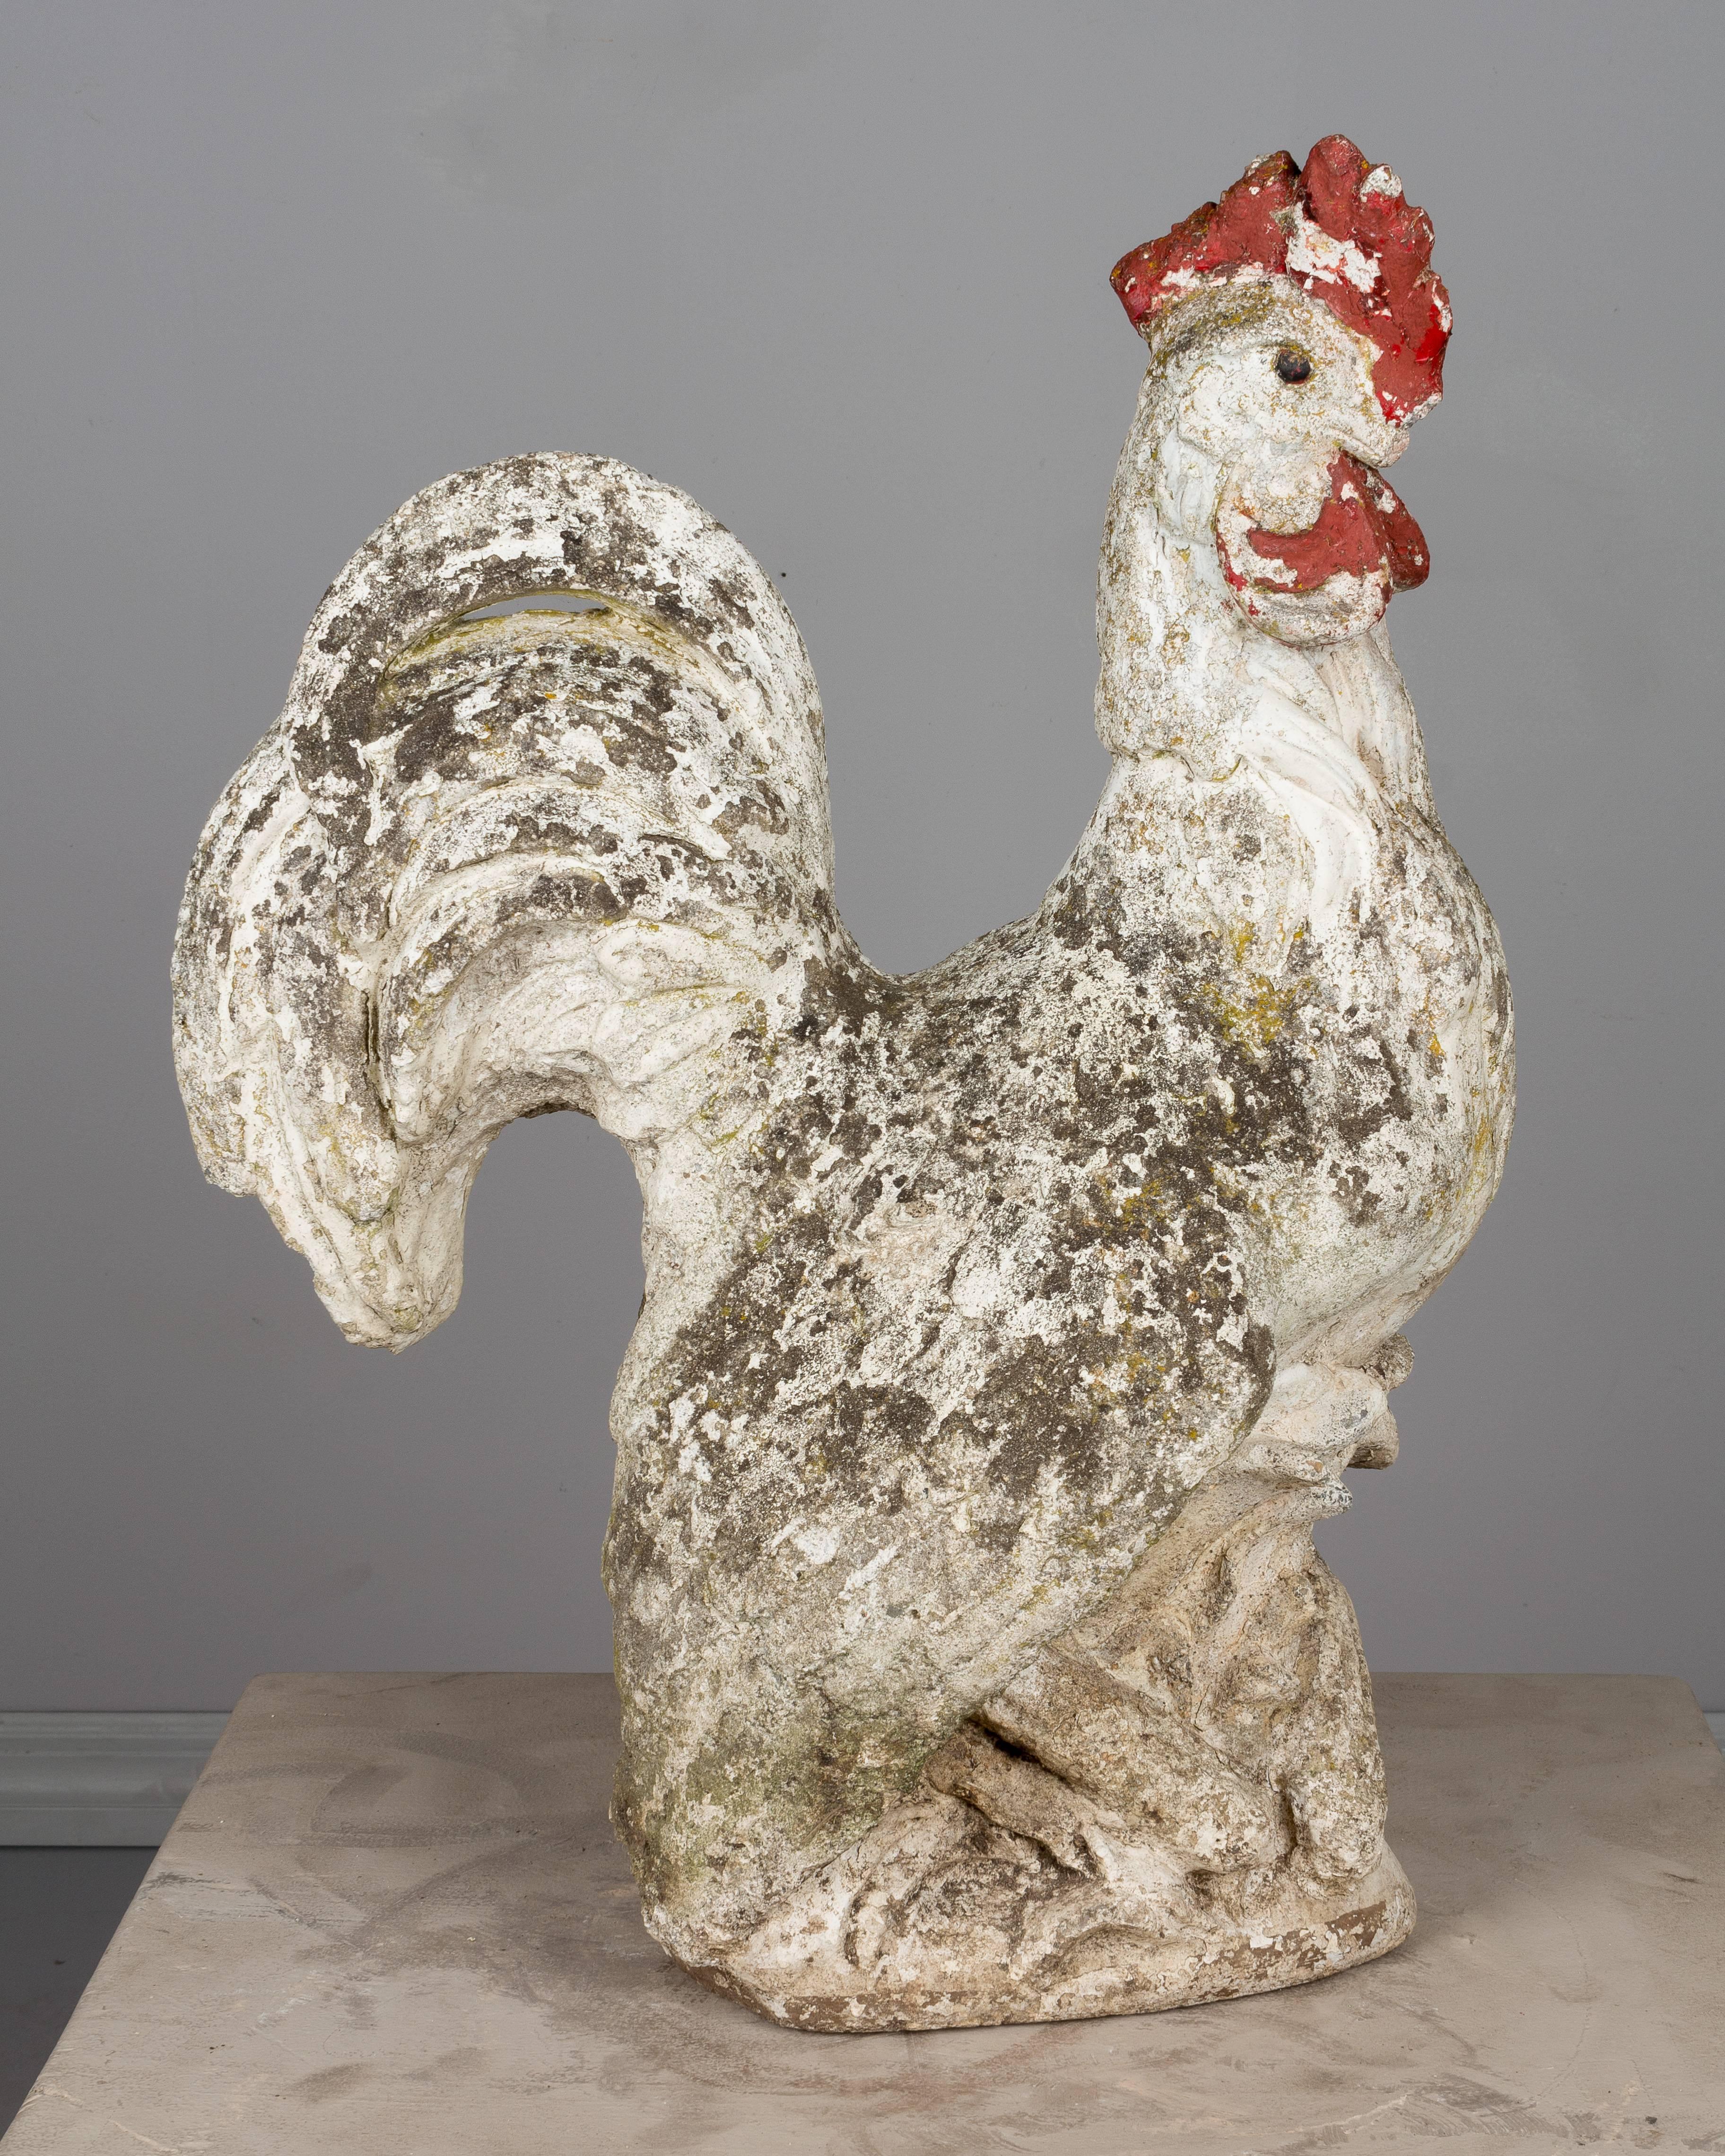 An early 20th century Country French garden sculpture of a rooster made of composite stone with remnants of old paint. Missing part of the red comb near the back of his head and the tip of the beak. Weight: 96 lbs. Please refer to photos for more